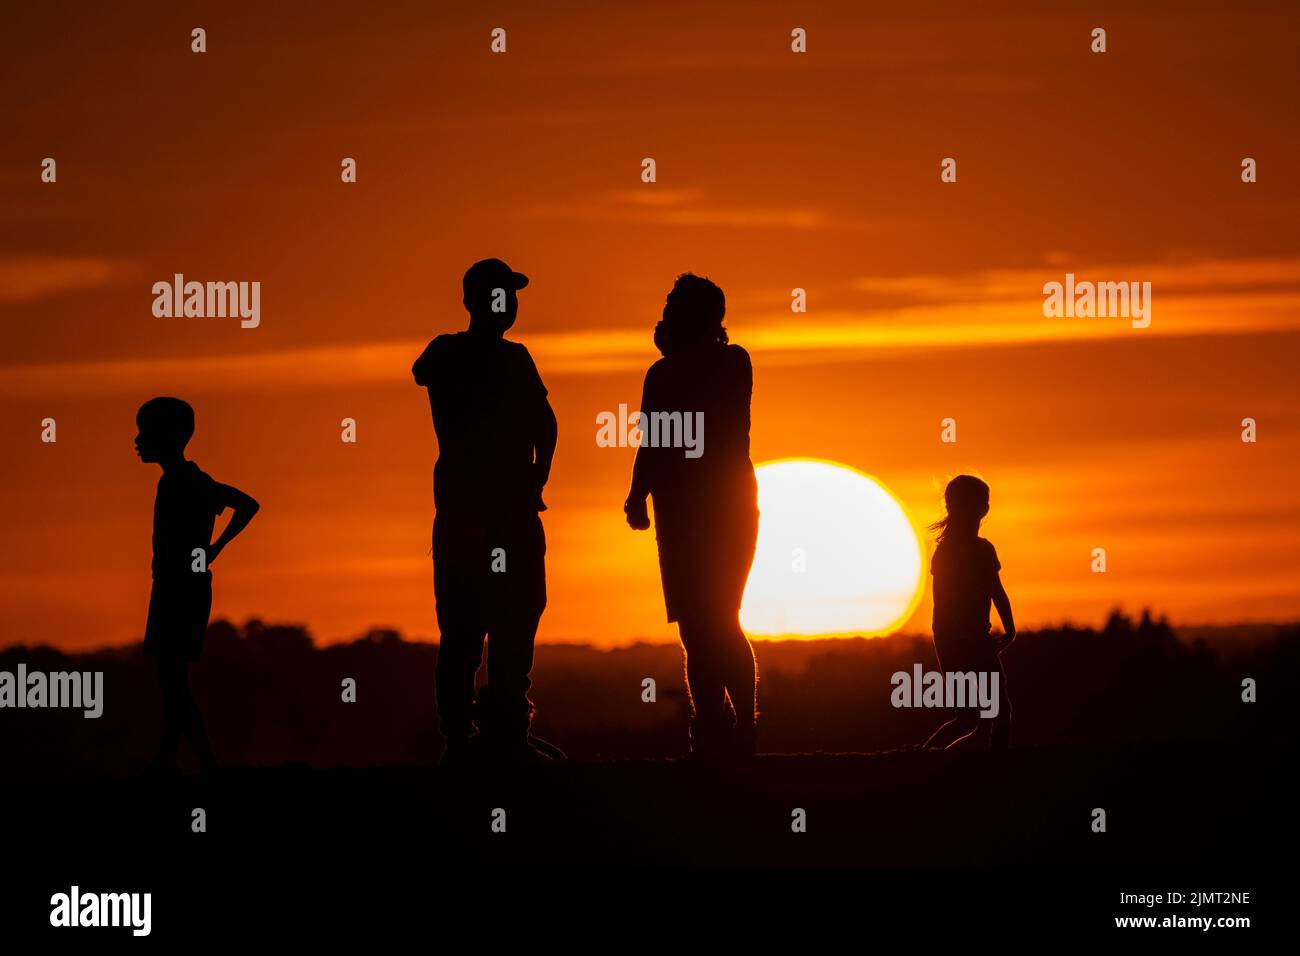 London, UK.  7 August 2022.  UK Weather – People view the sunset at Northala Fields near Northolt in west London.  According to the Met Office, July 2022 was the driest July for England since 1935.  Hose pipe bans are in place in certain areas as drought conditions continue, with temperatures exceeding 30C in the south expected next week. Credit: Stephen Chung / Alamy Live News Stock Photo